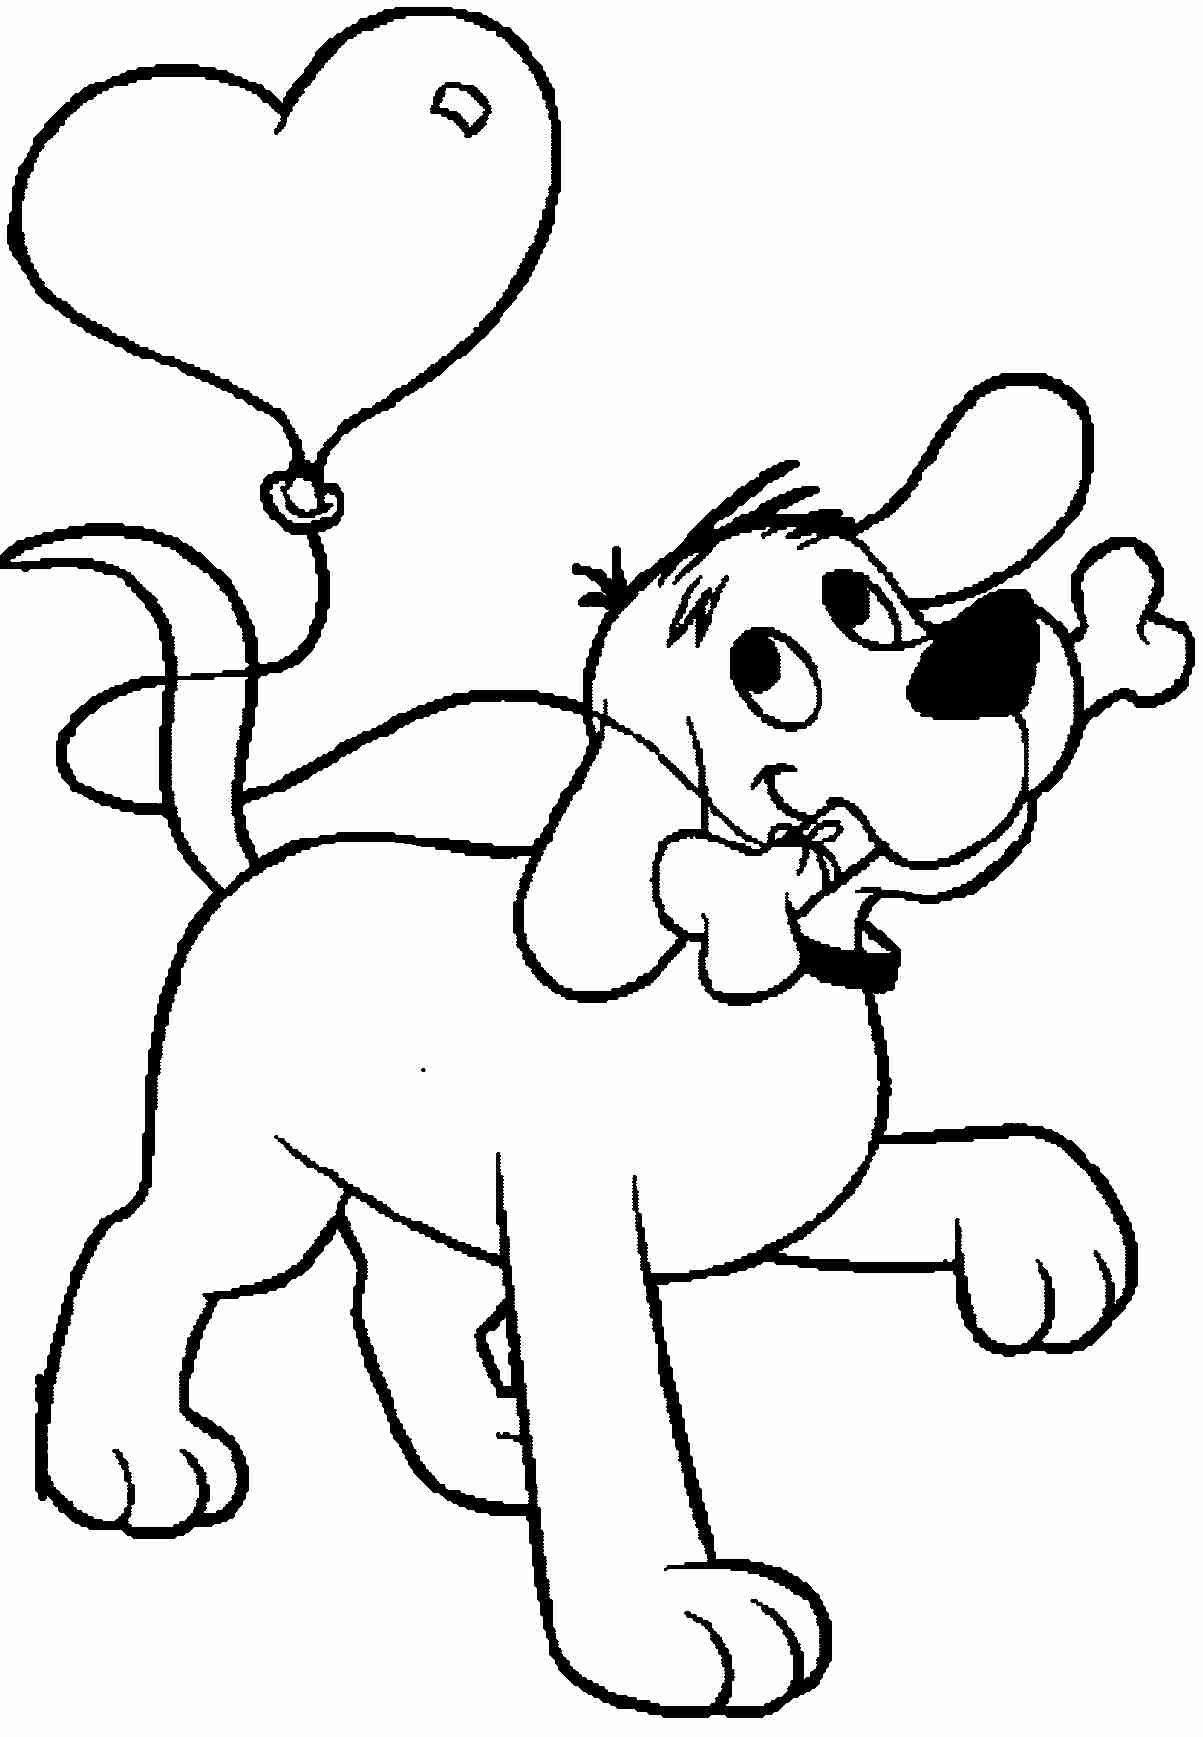 clifford-the-big-red-dog-coloring-pages-at-getcolorings-free